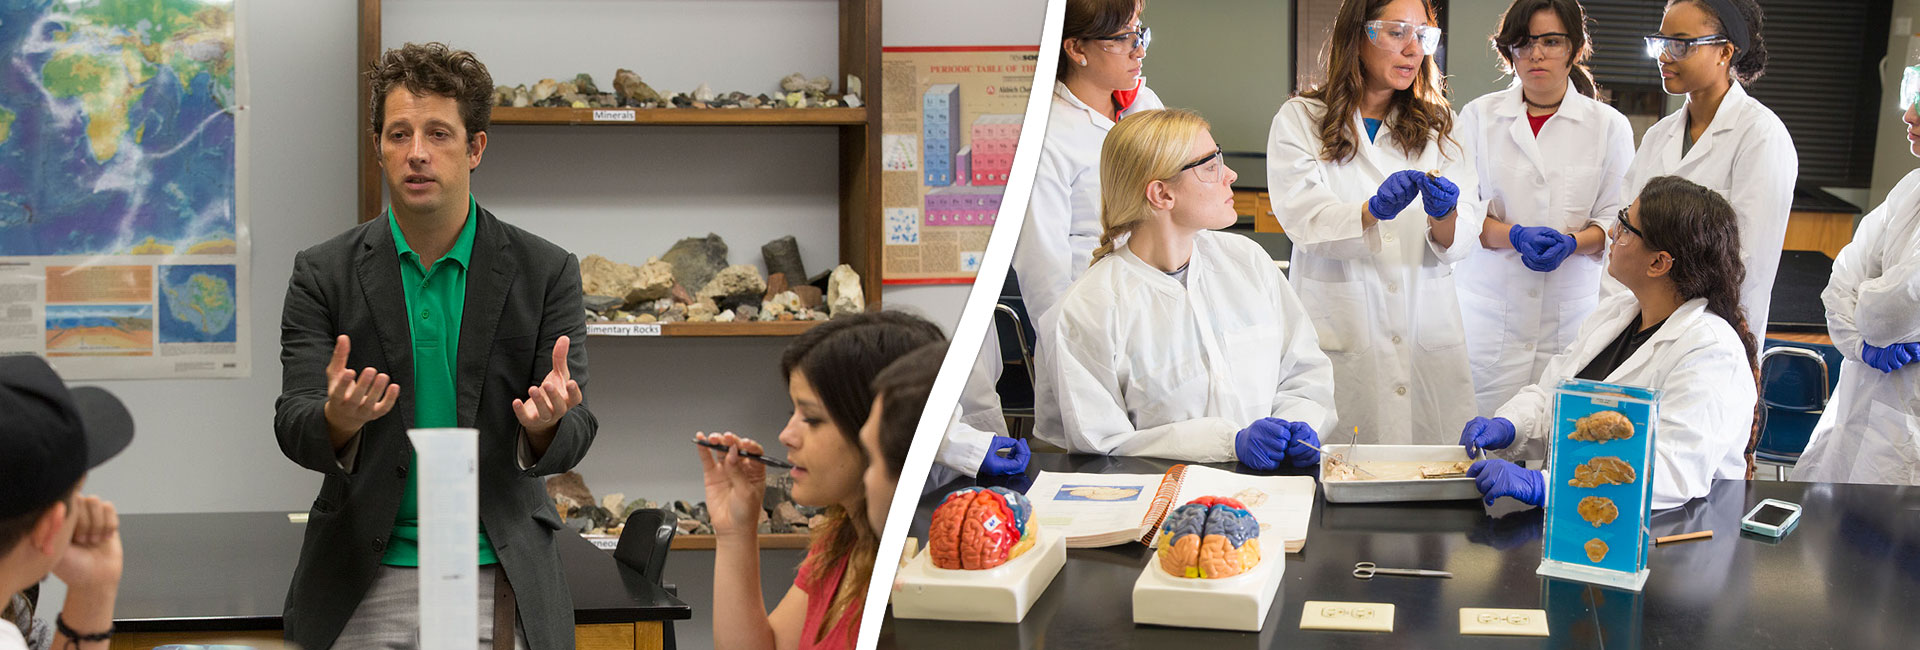 Goal 7 Banner: Two separate classrooms. One with a male professor standing to teach. The second of a group of students and a female professor in labcoats looking at a dissection.